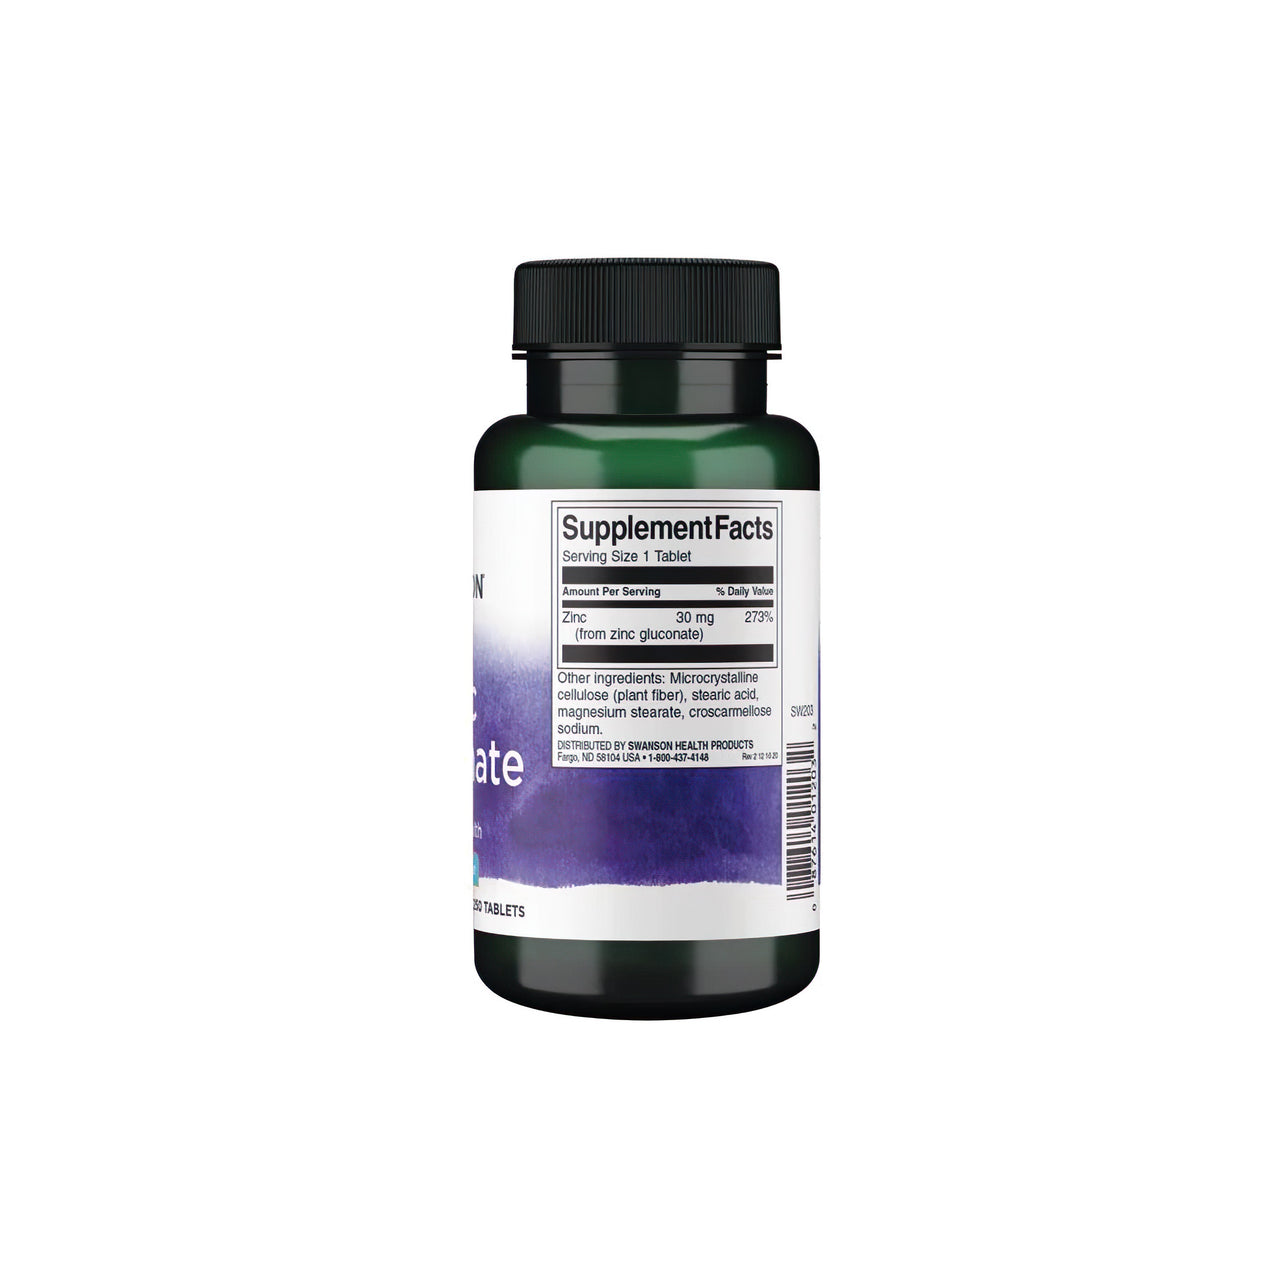 A bottle of Swanson Zinc Gluconate 30 mg 250 Tablets showing supplement facts label for Daily Wellness.